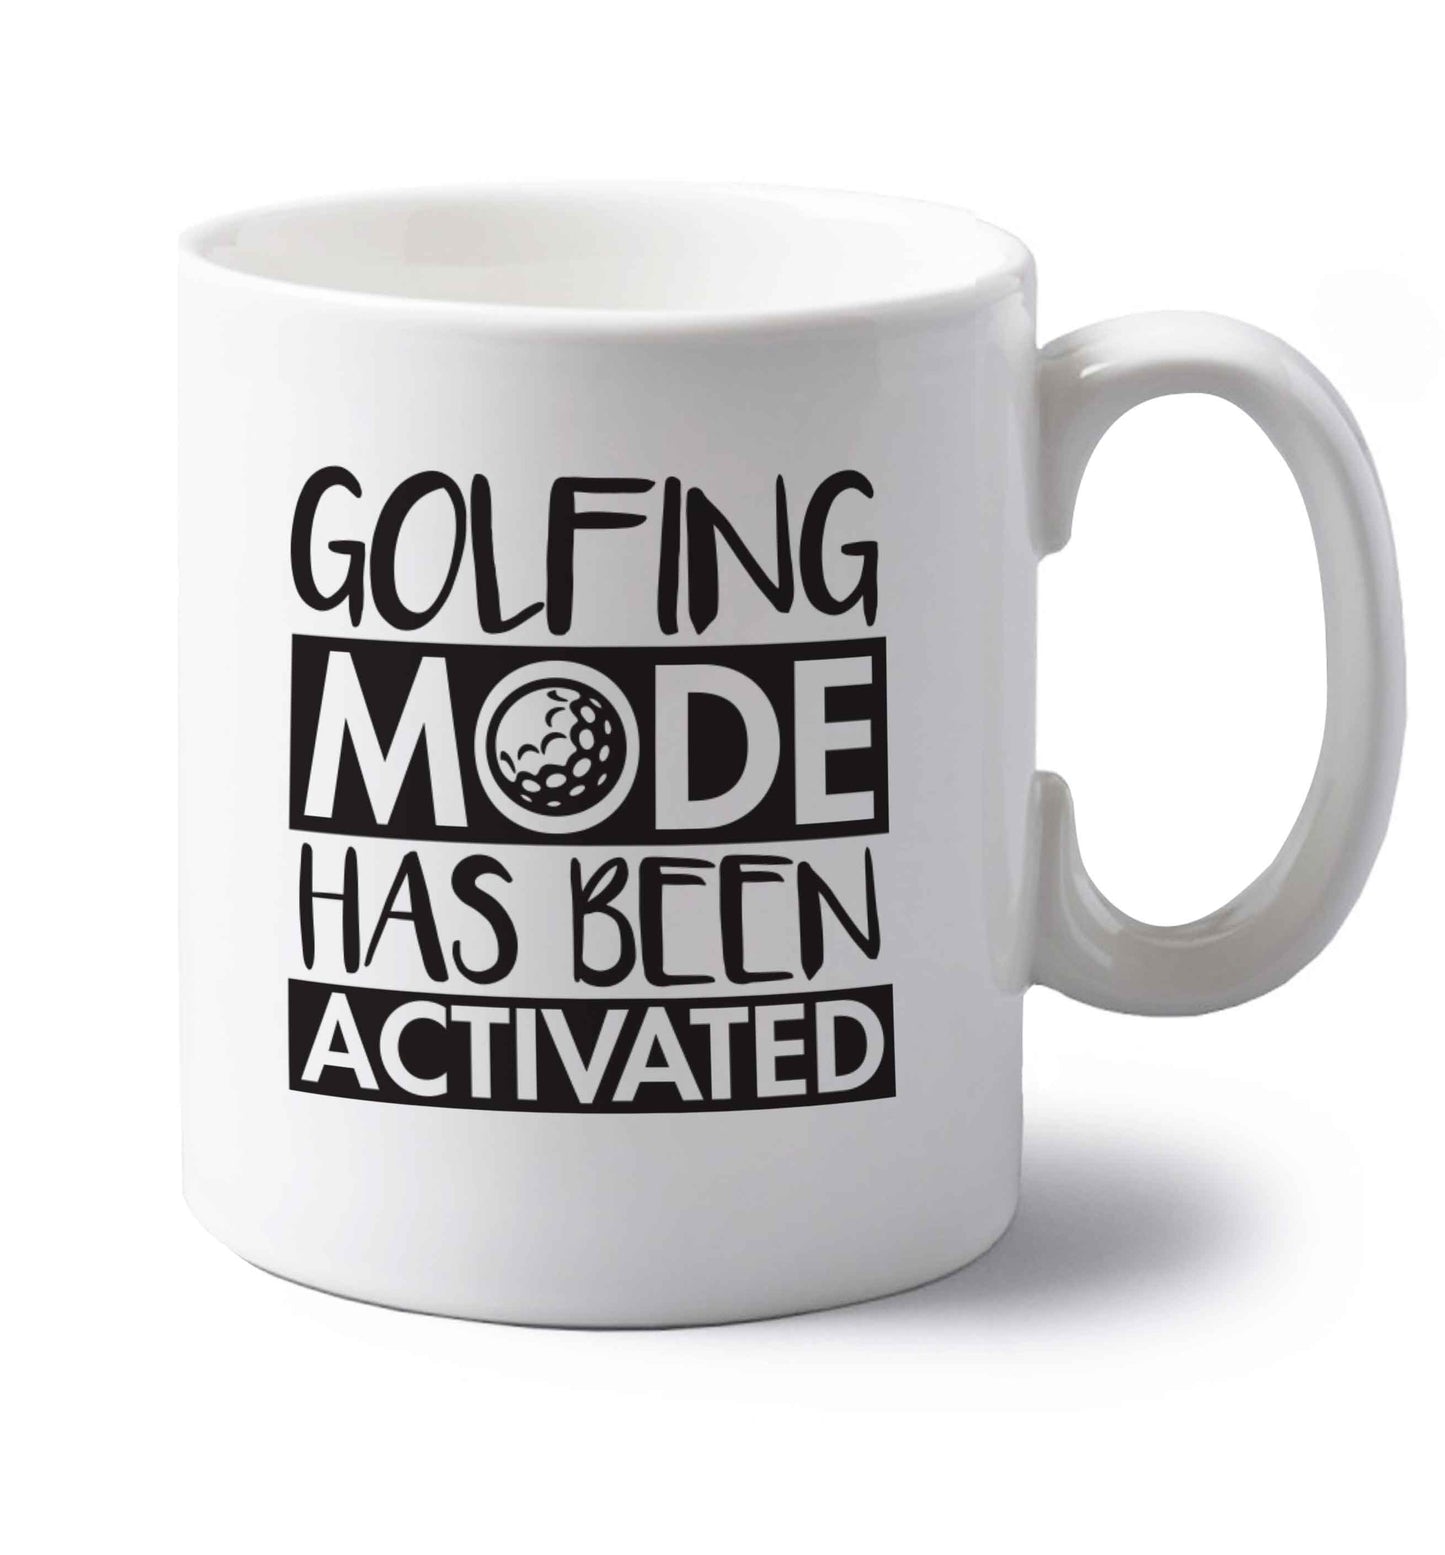 Golfing mode has been activated left handed white ceramic mug 